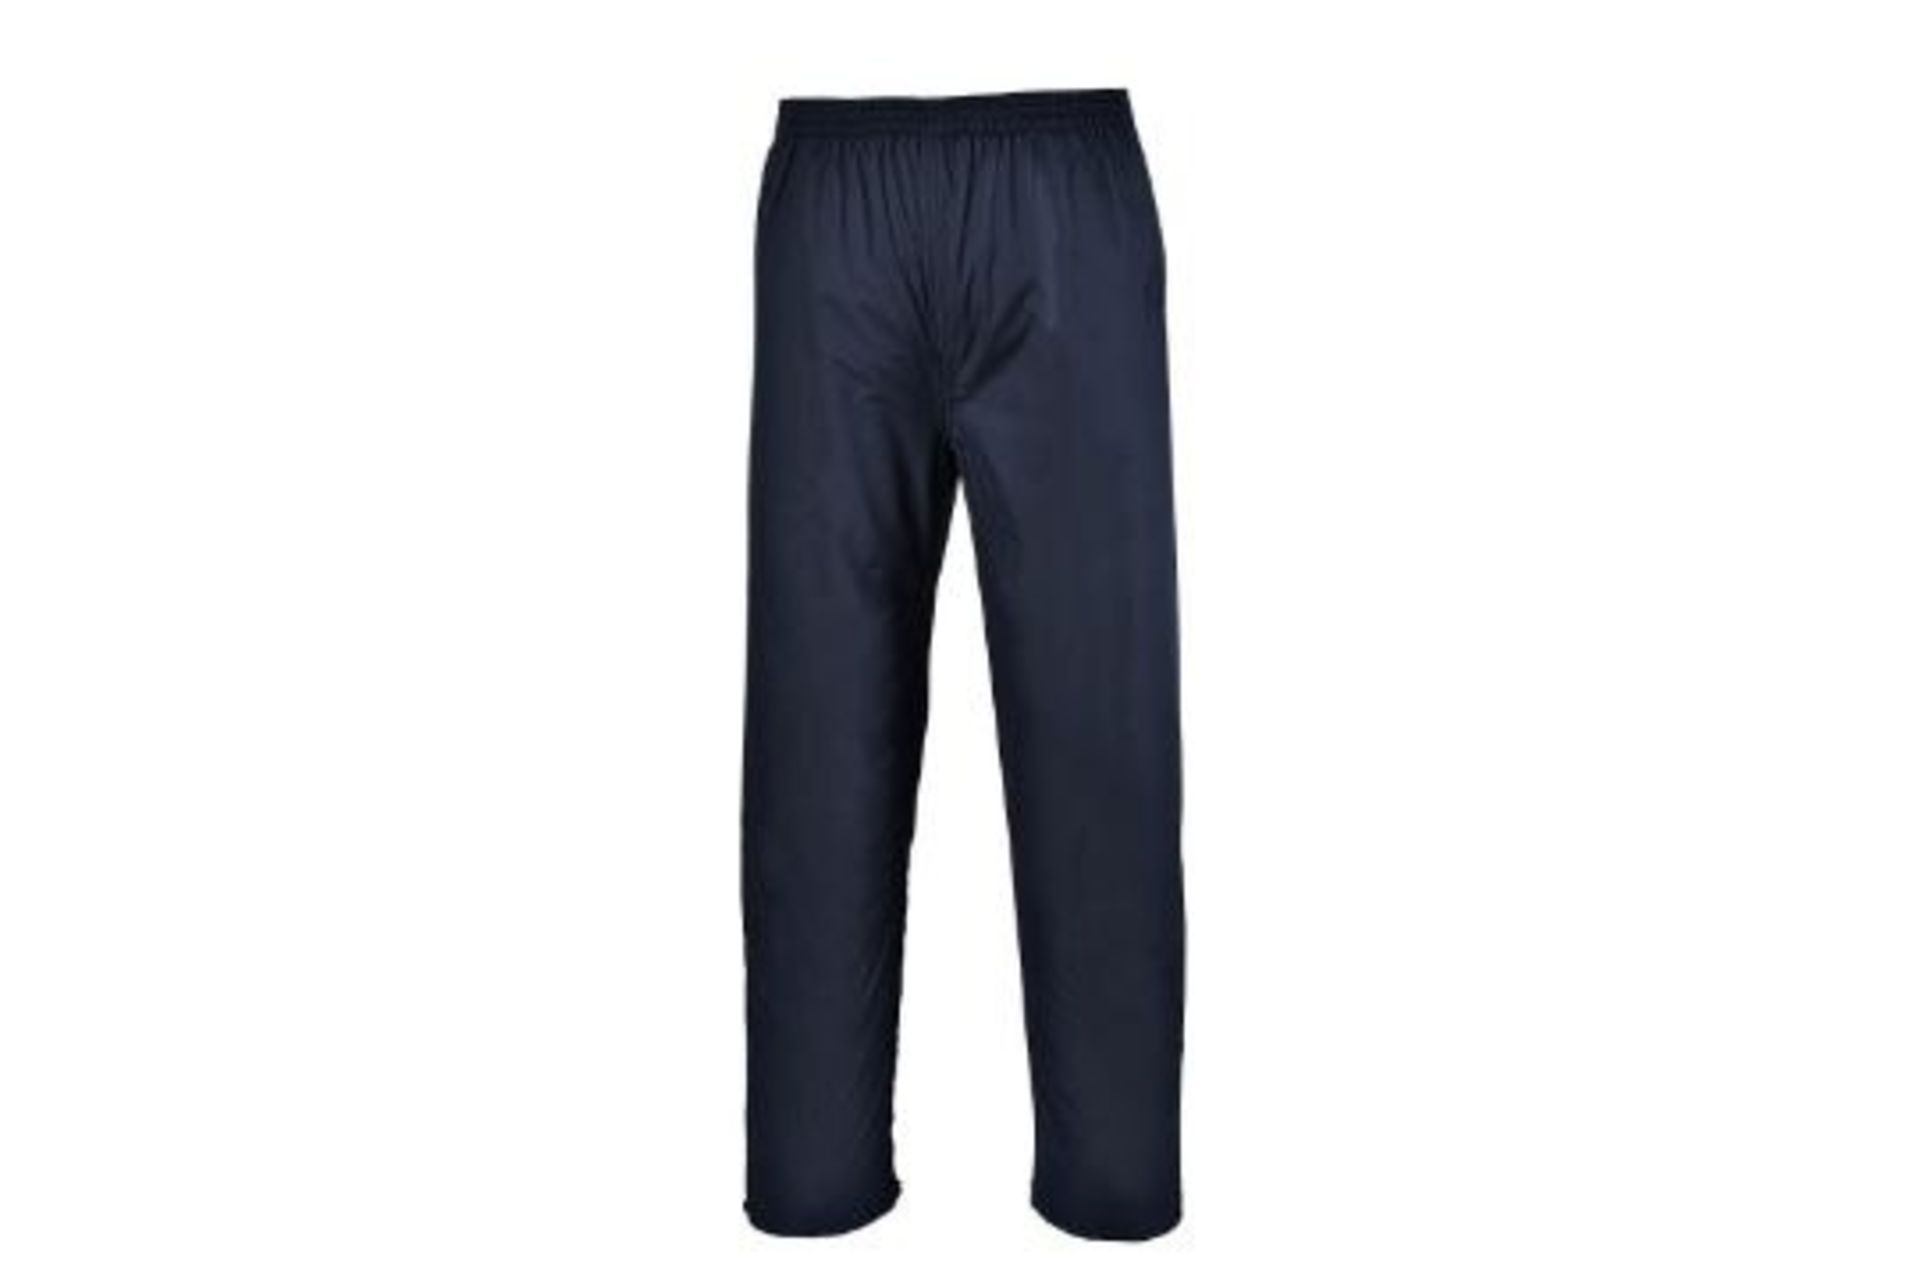 20x Brand New Portwest Navy Ayr Breathable Trousers - XL RRP £14.78 Each (R36)